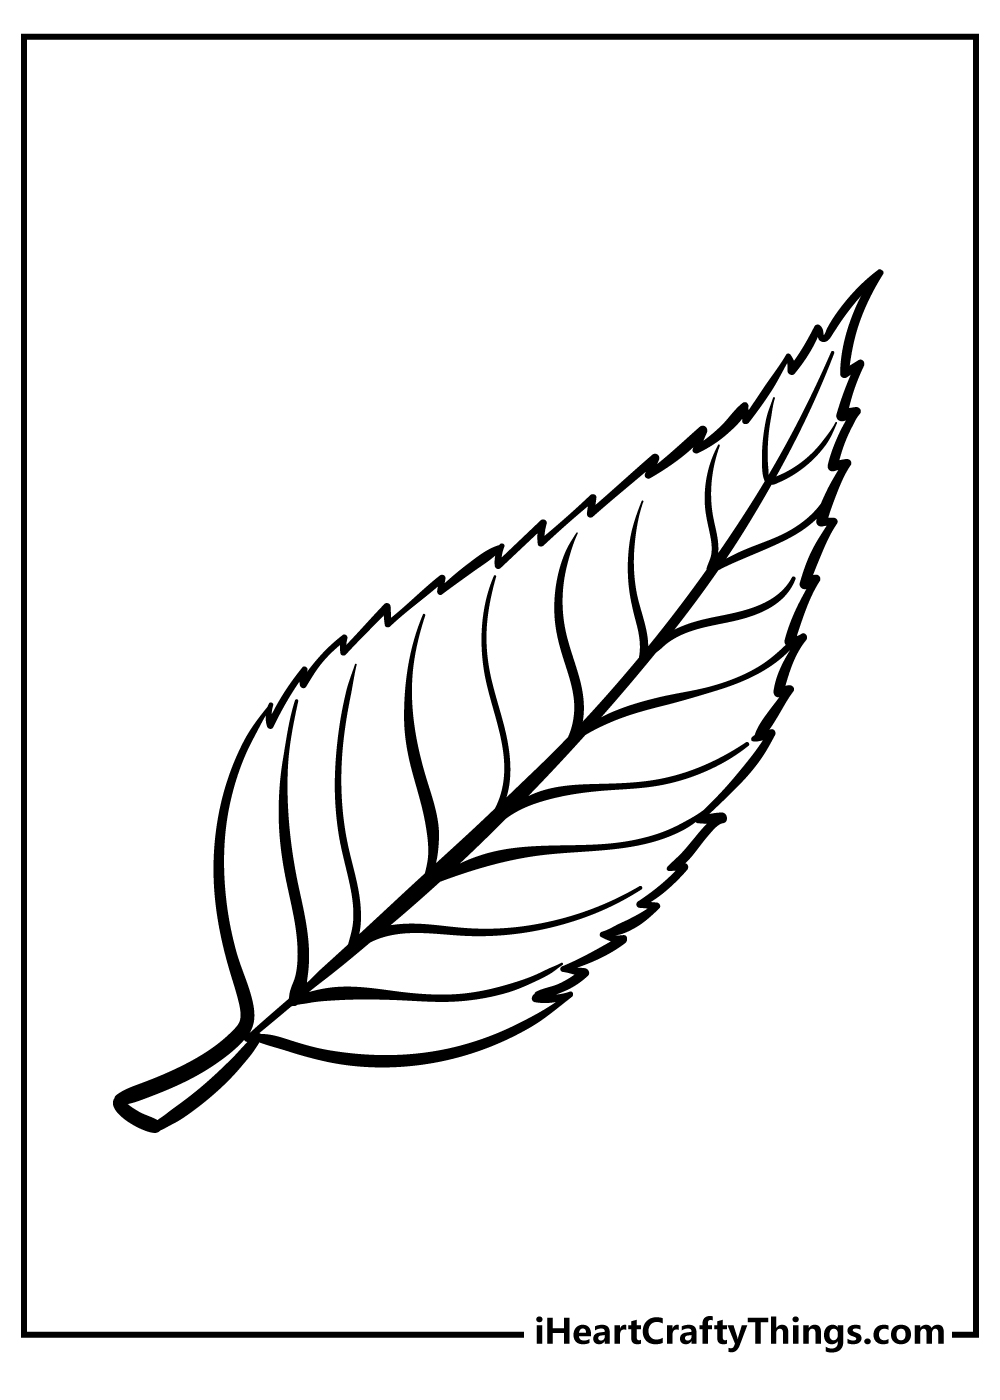 Leaf Coloring Pages for kids free download